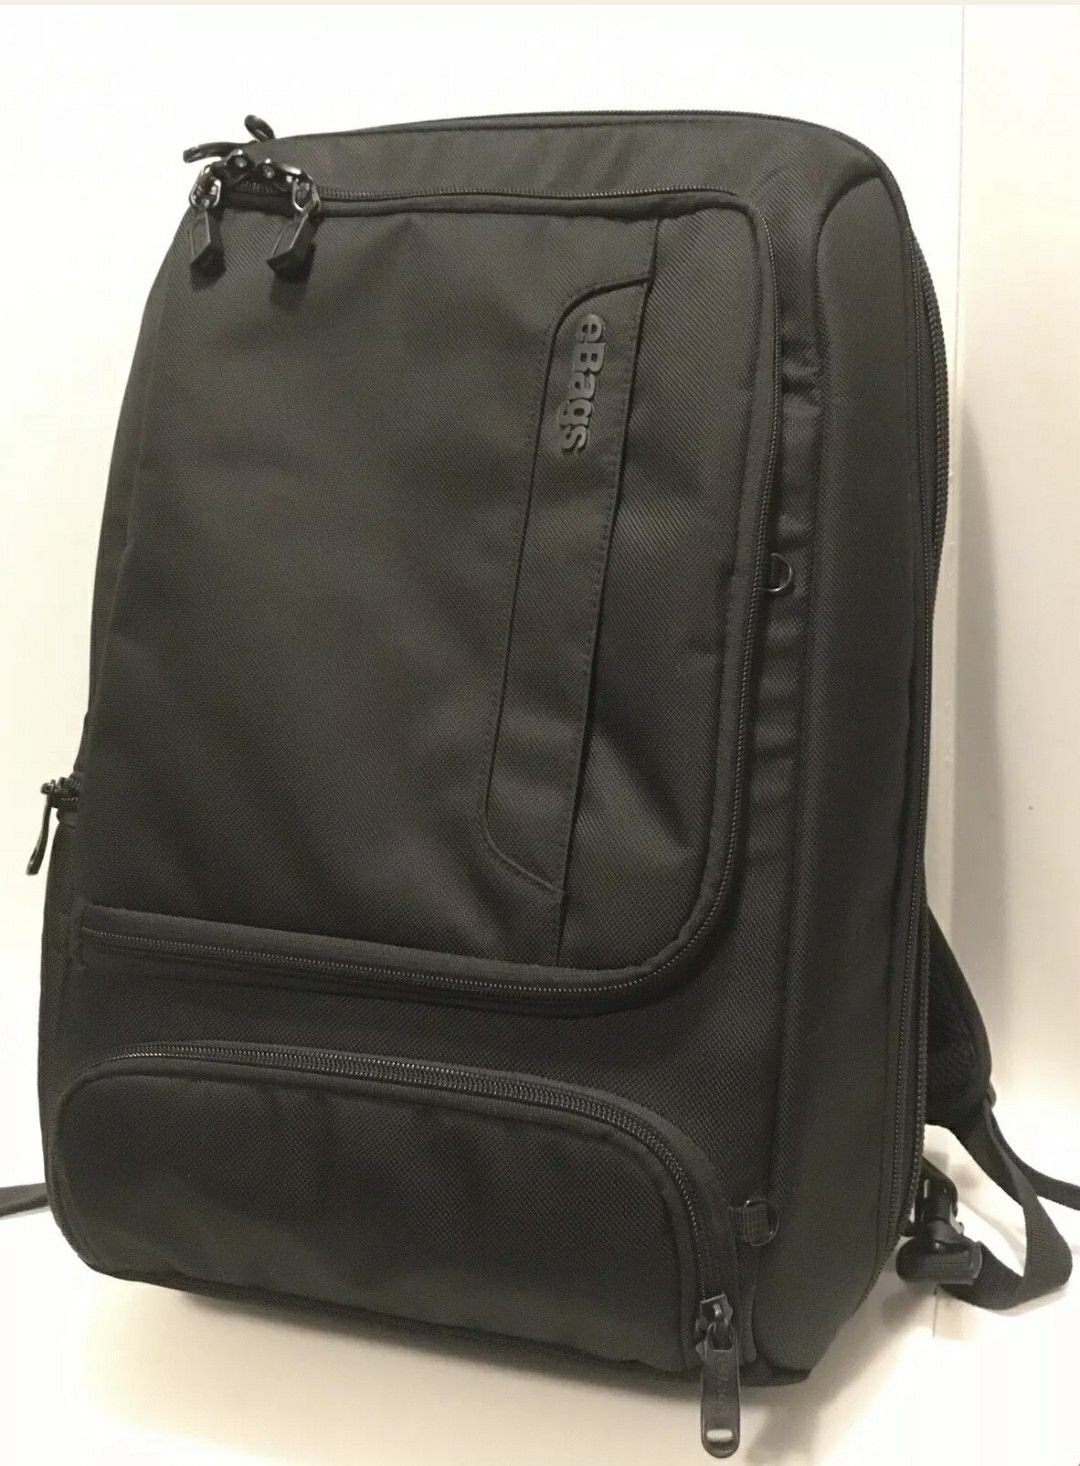 eBags Professional Slim Laptop Backpack Business Black Carry On. 15.75" laptop